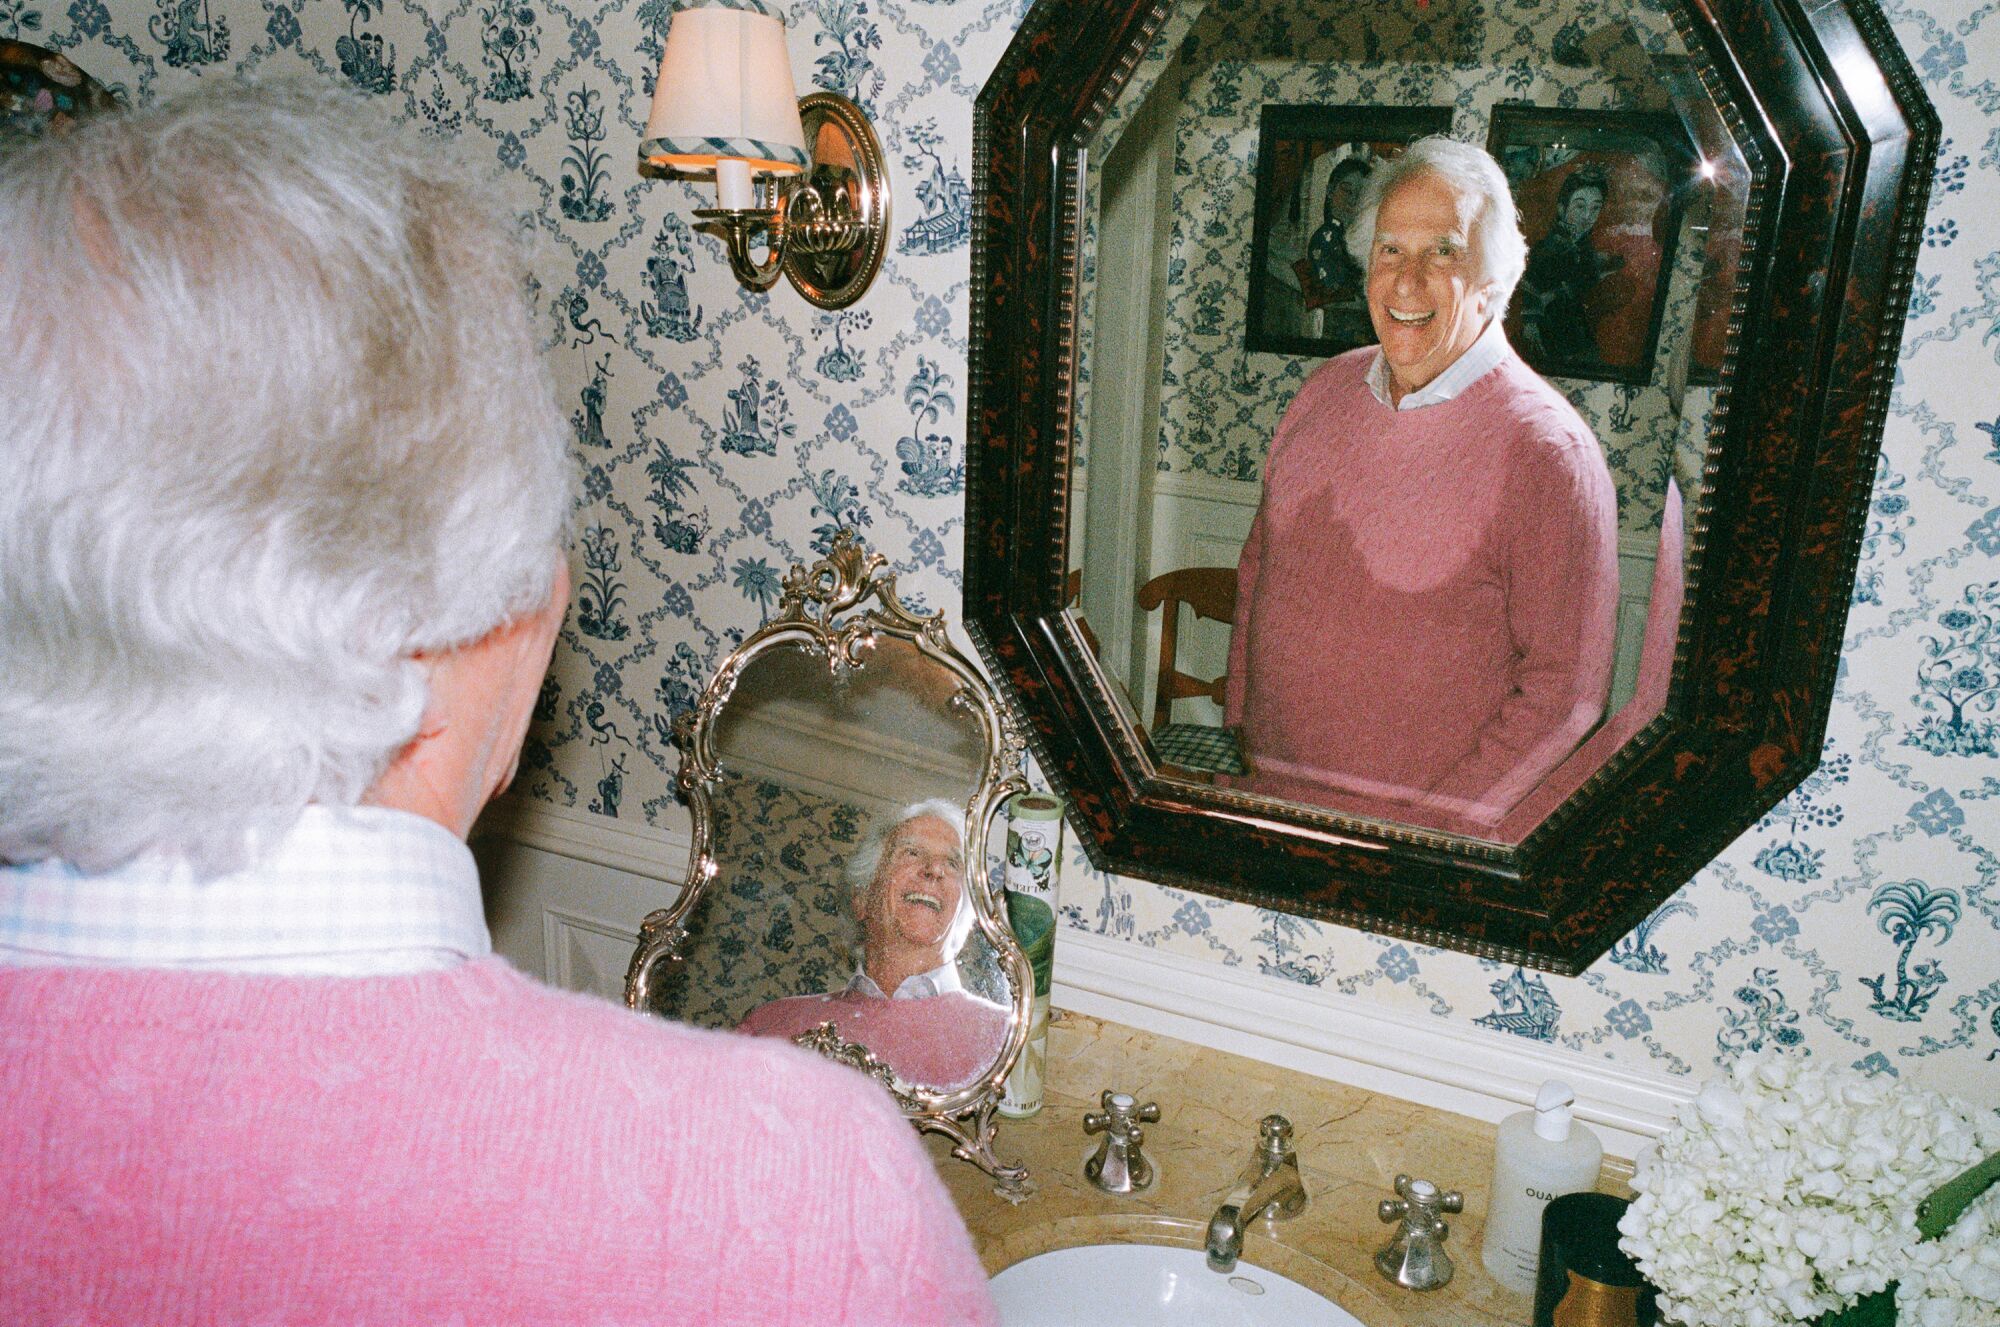 A man in a pink sweater looks at the camera in mirror